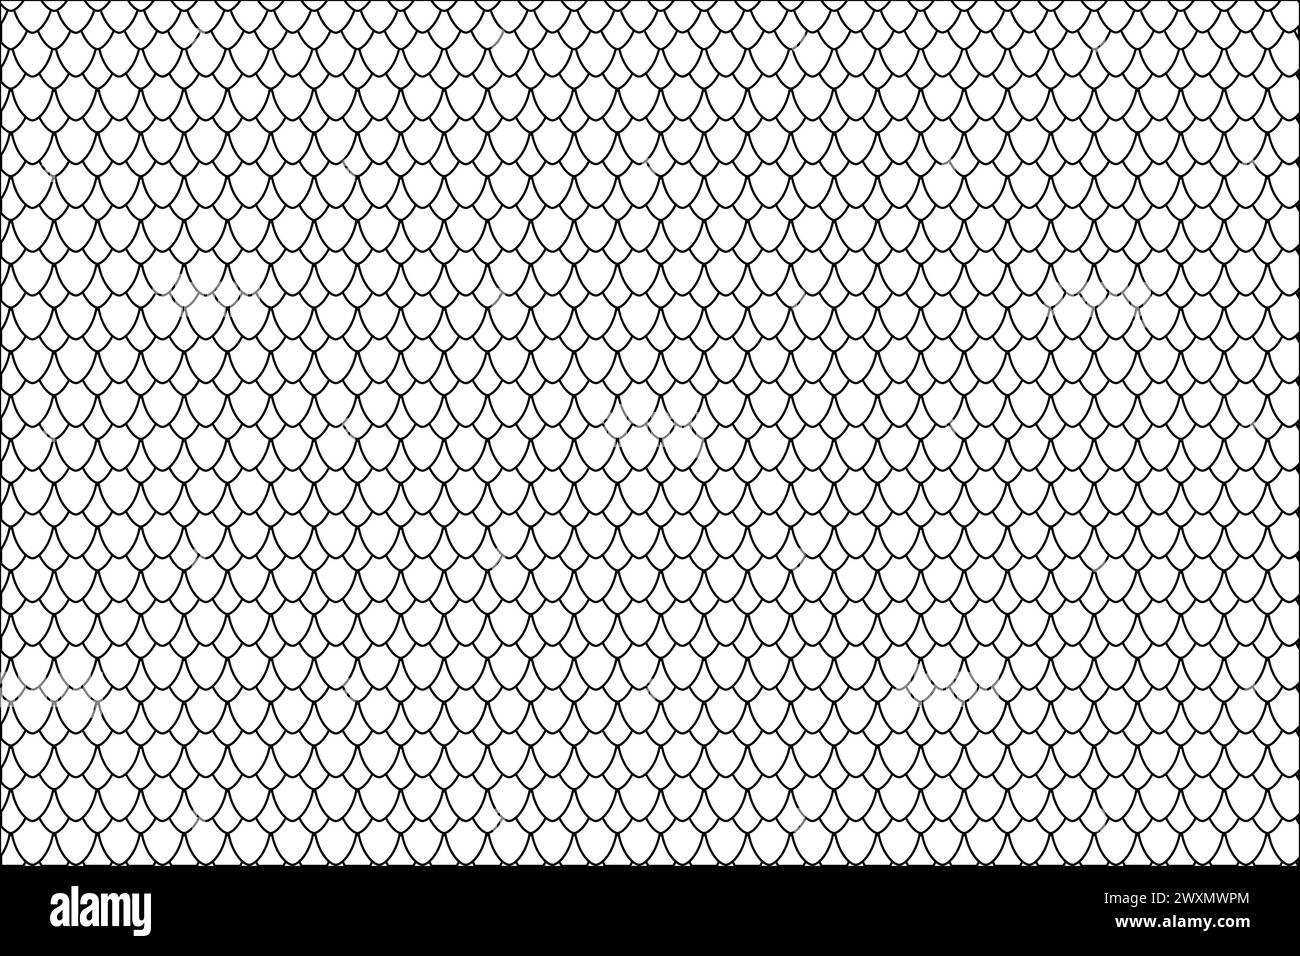 Dragon scale pattern background black and white Stock Vector